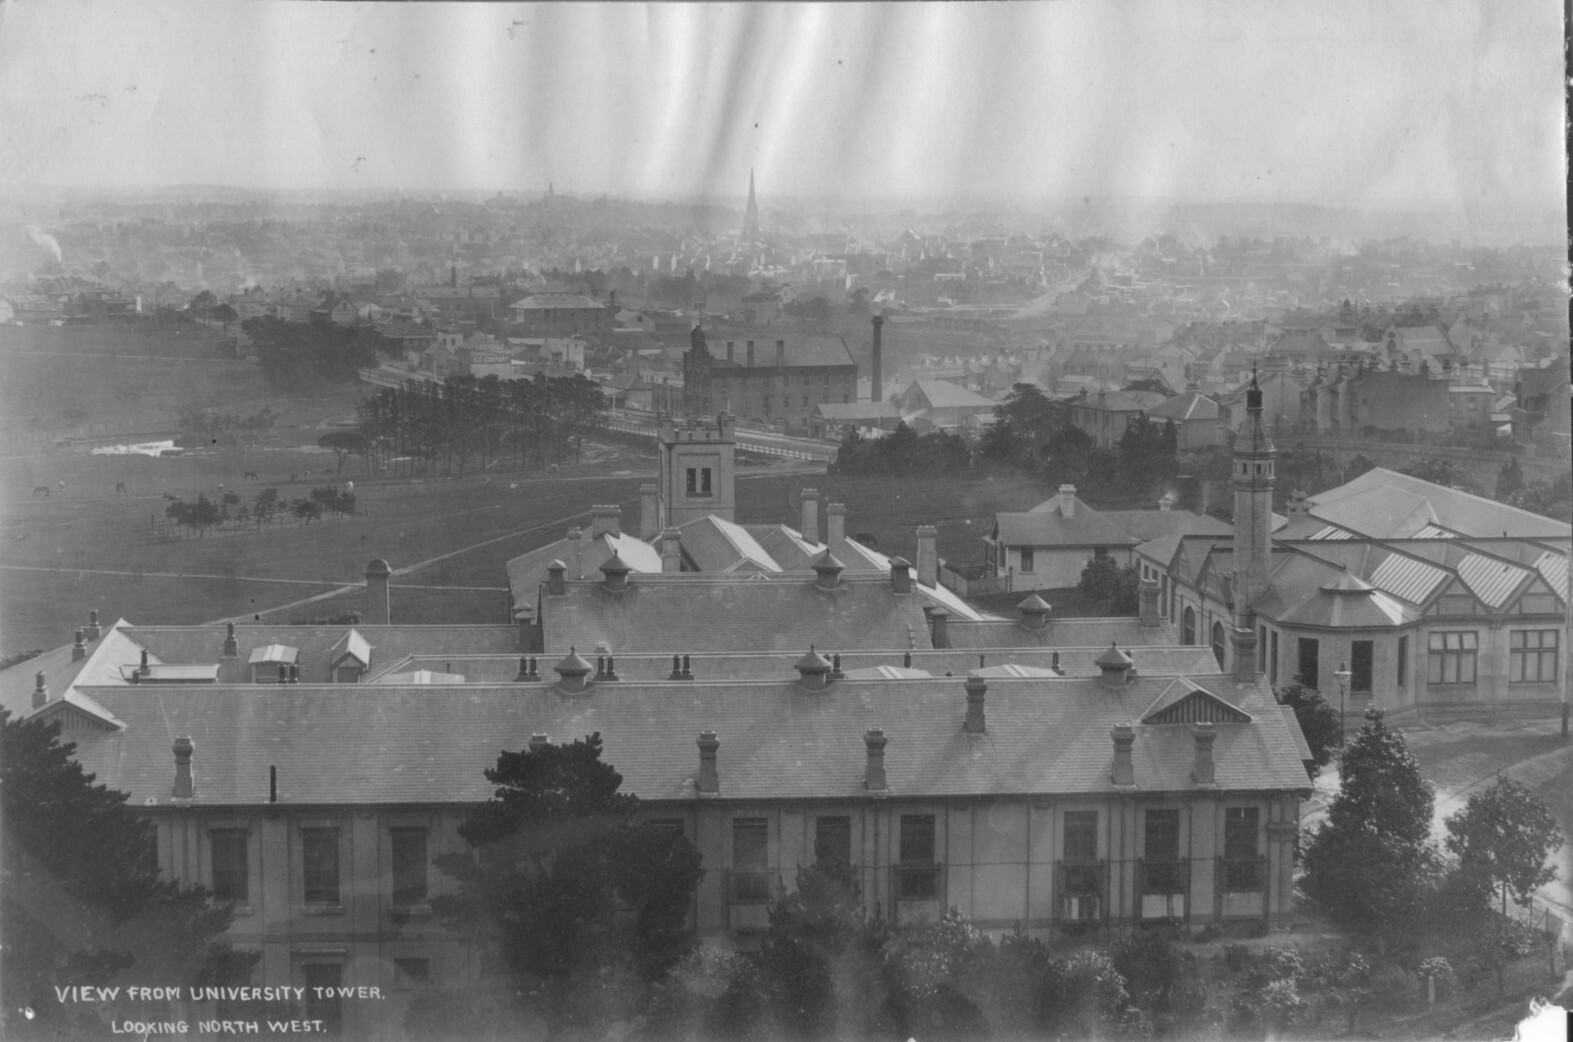 VIEW OF BADHAM AND OLD ENGINEERING BUILDING FROM CLOCK TOWER